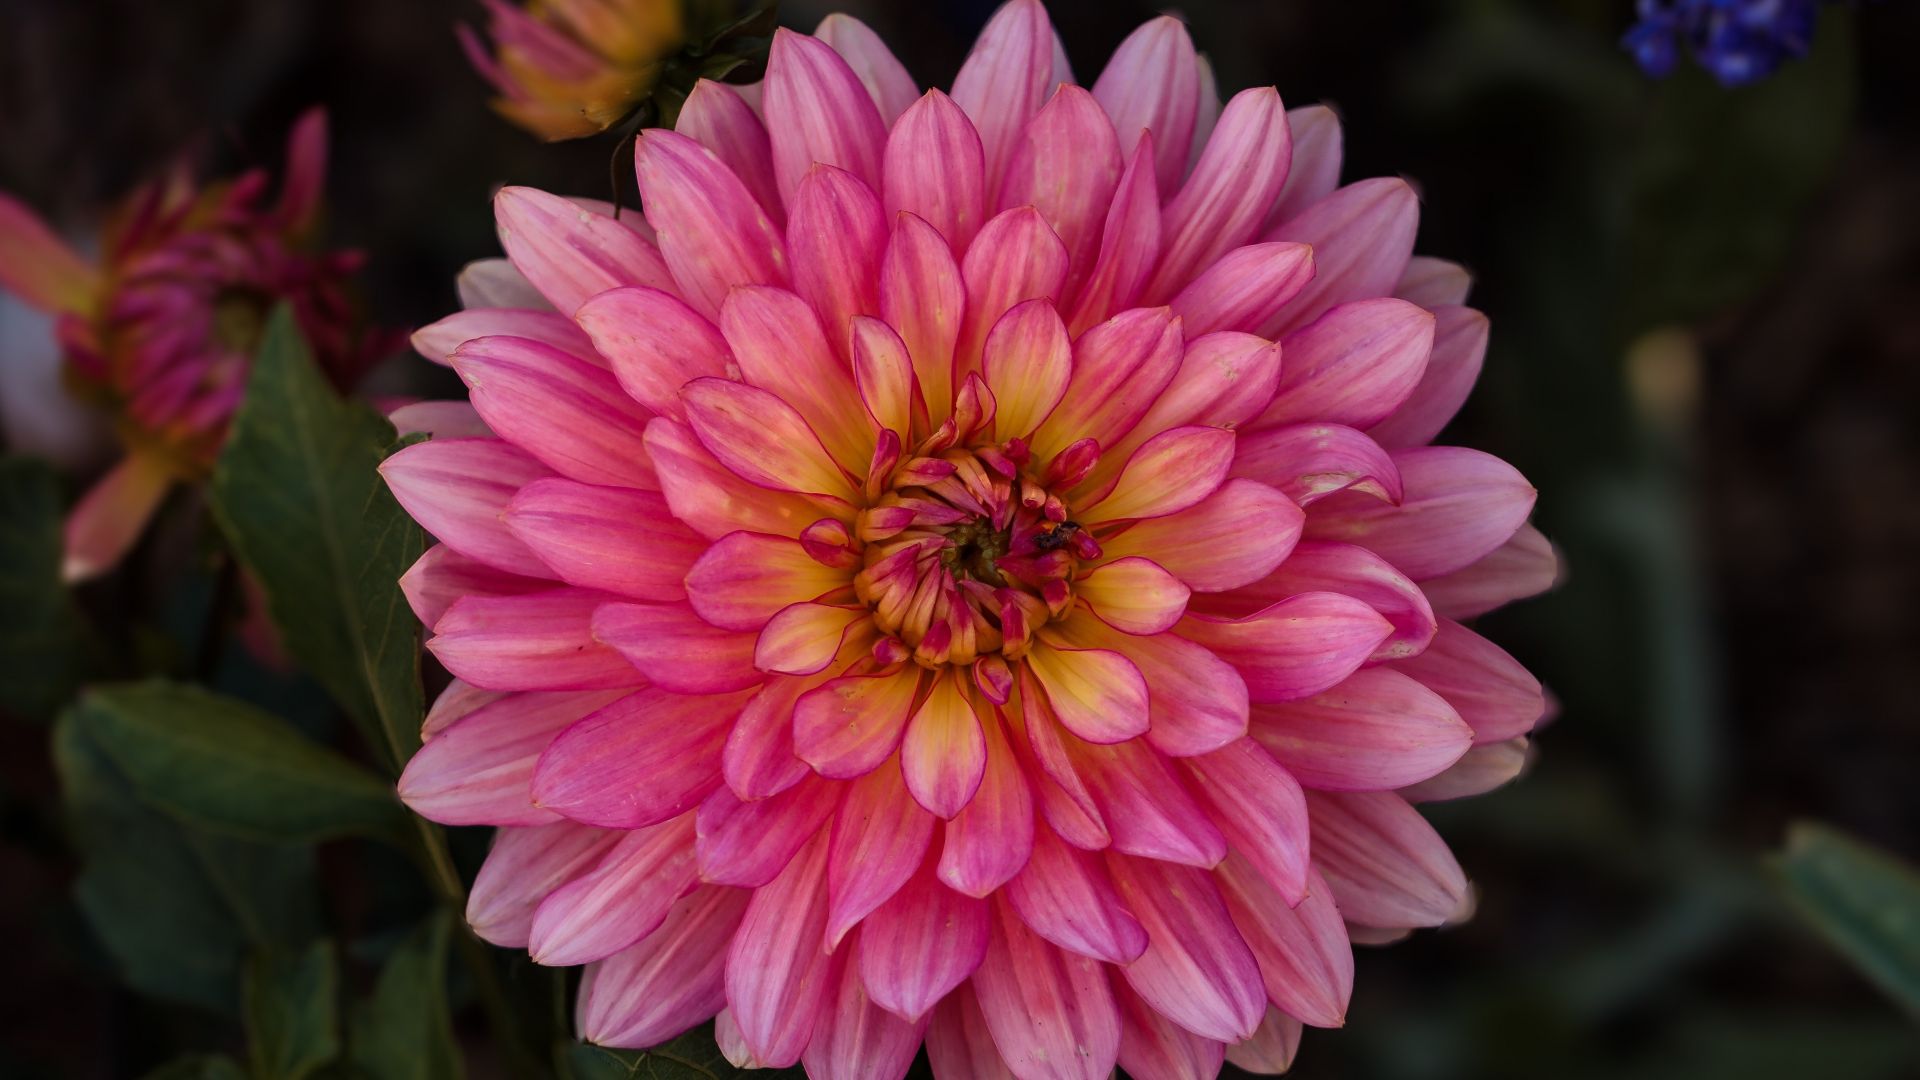 Pink dahlia, flower wallpaper, HD image, picture, background, b46224